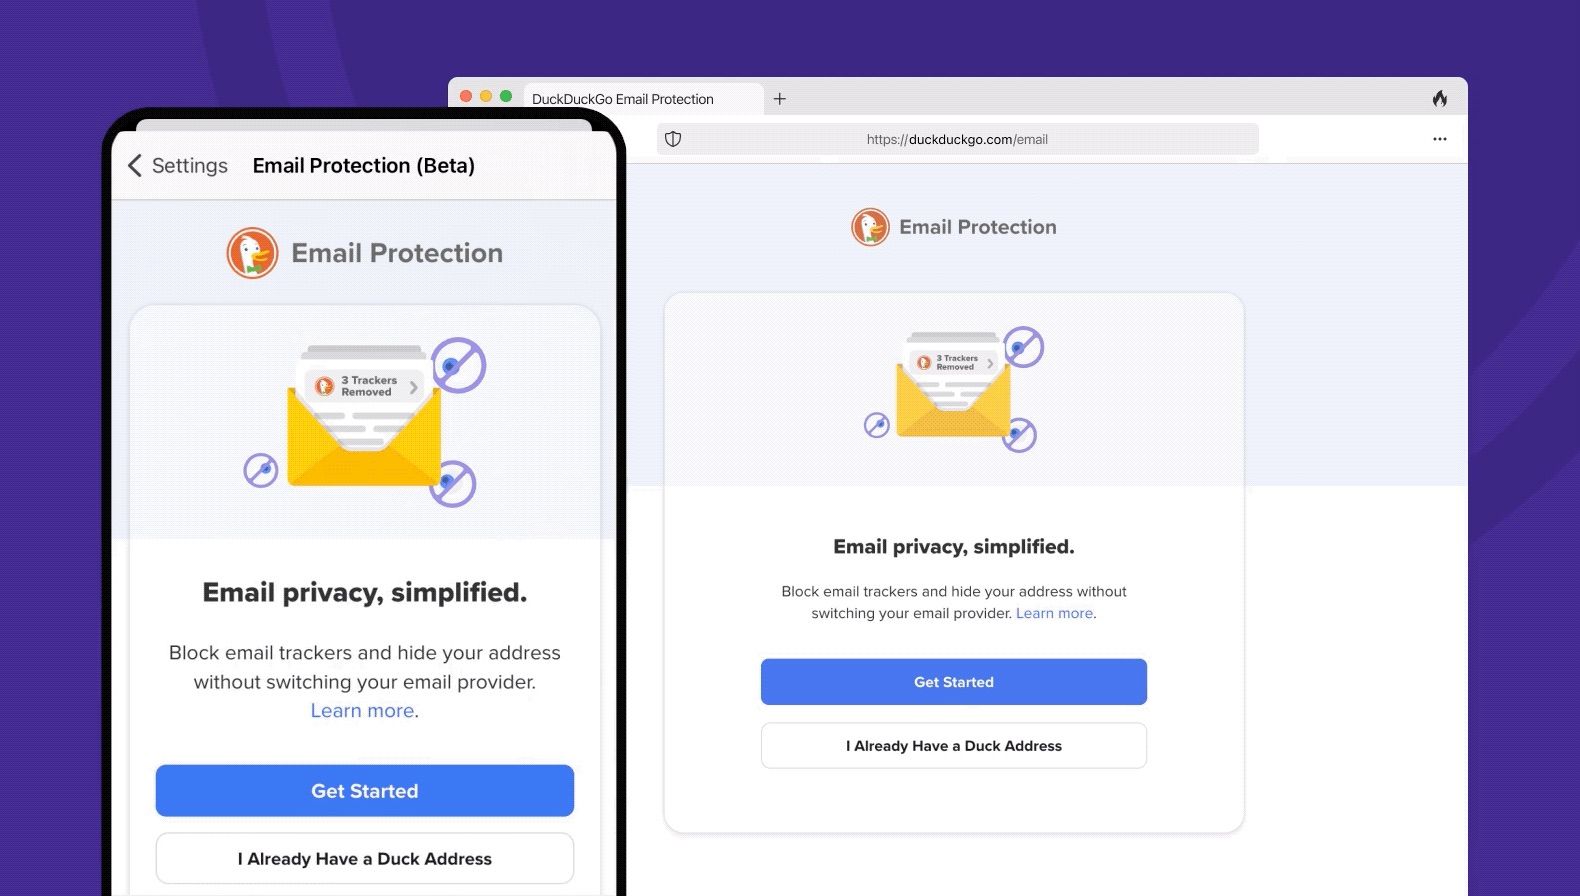 DuckDuckGo Email Protection Beta